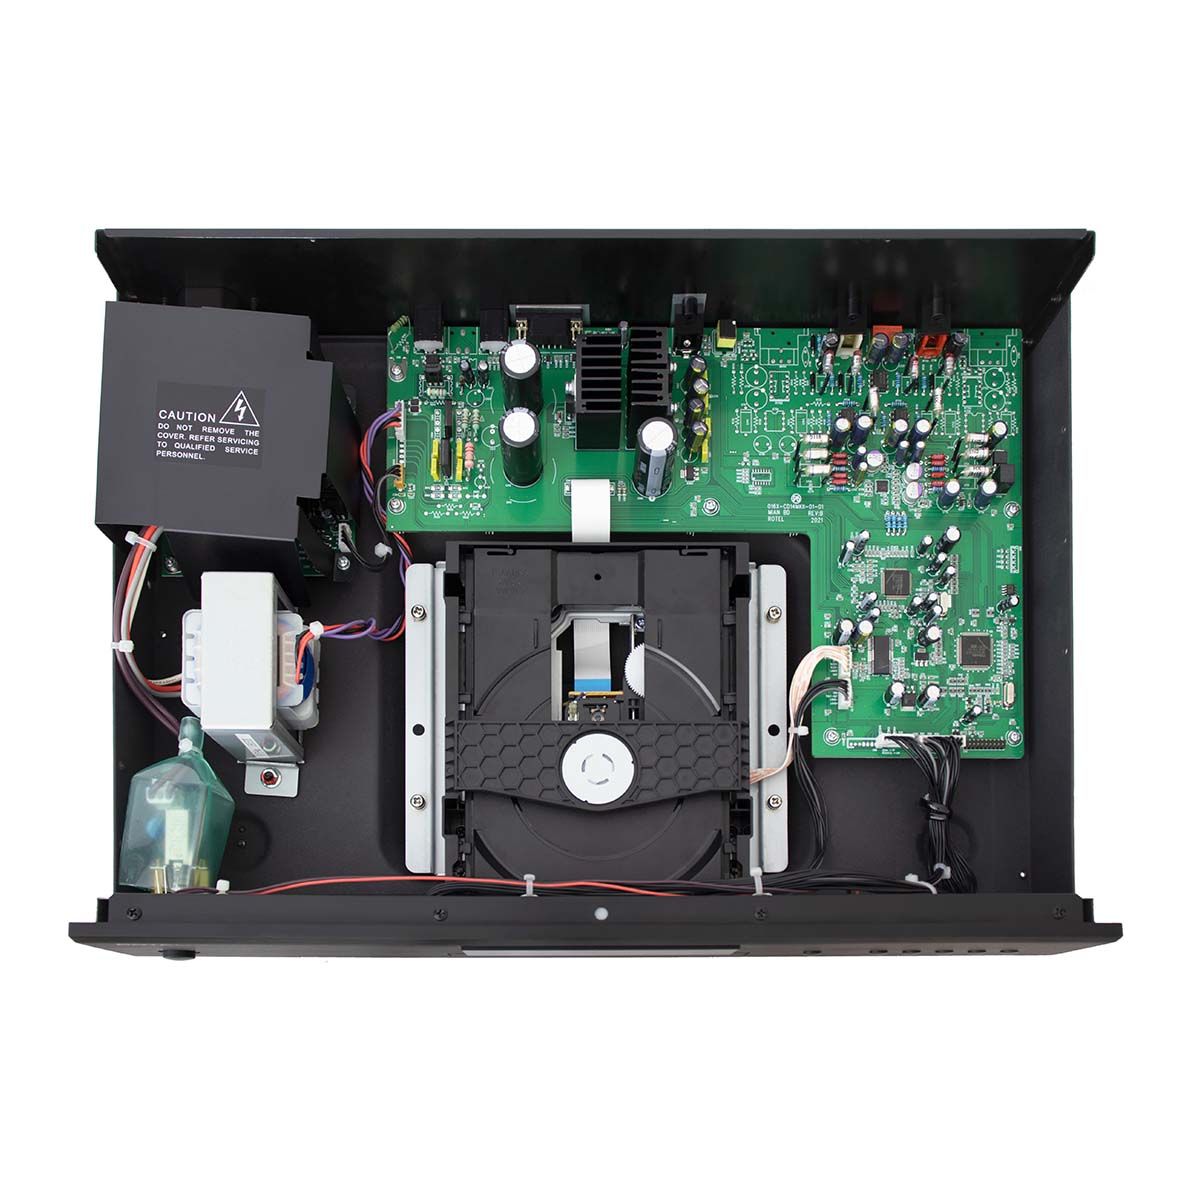 Rotel CD14MKII CD Player, Black, top view with internal components exposed